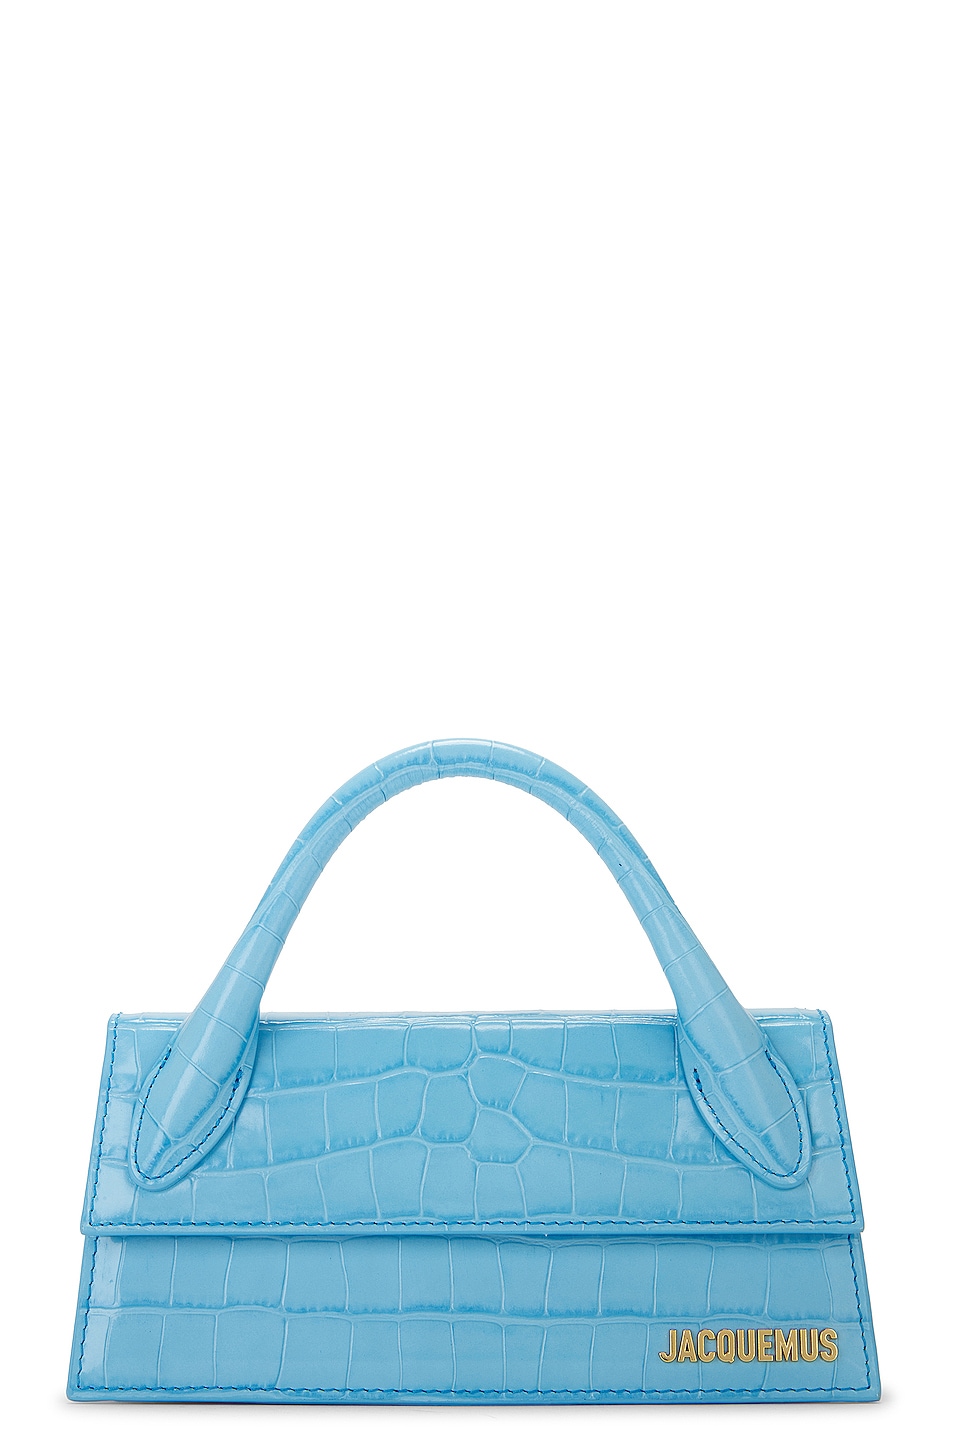 Le Chiquito Long Bag in Blue